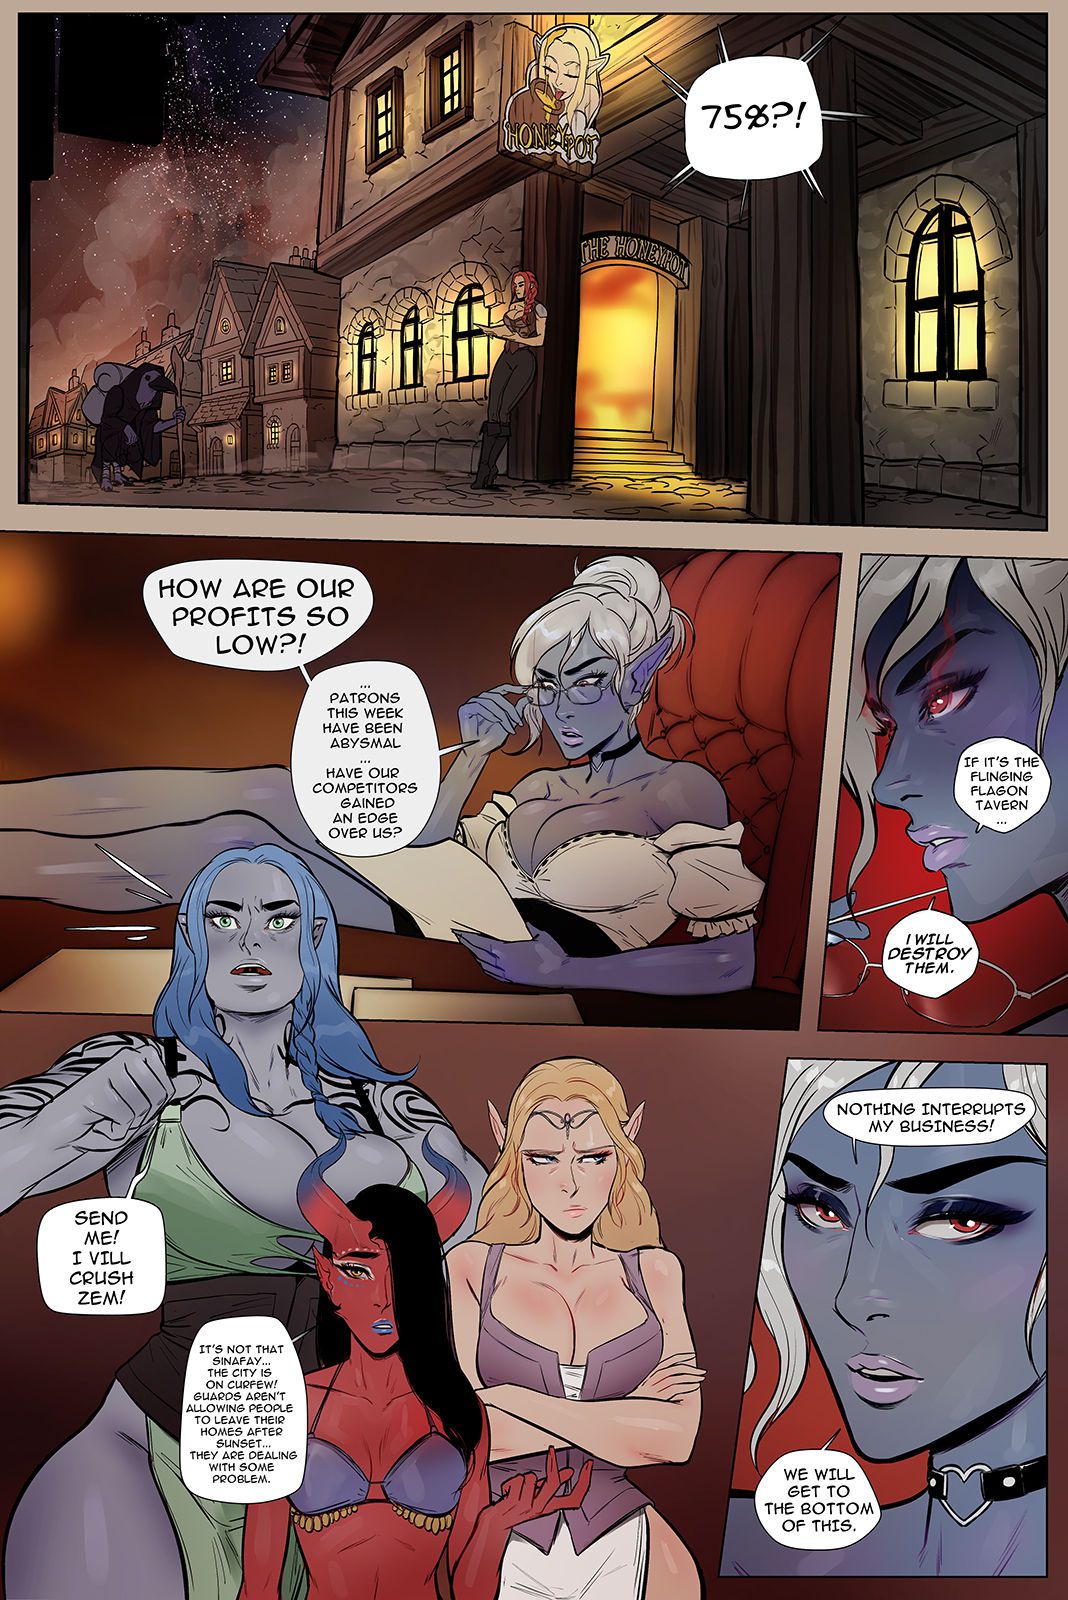 [cherry-gig] Tavern Sluts / Honeypot (ongoing) (Dungeons & Dragons) (ongoing) [English] 28